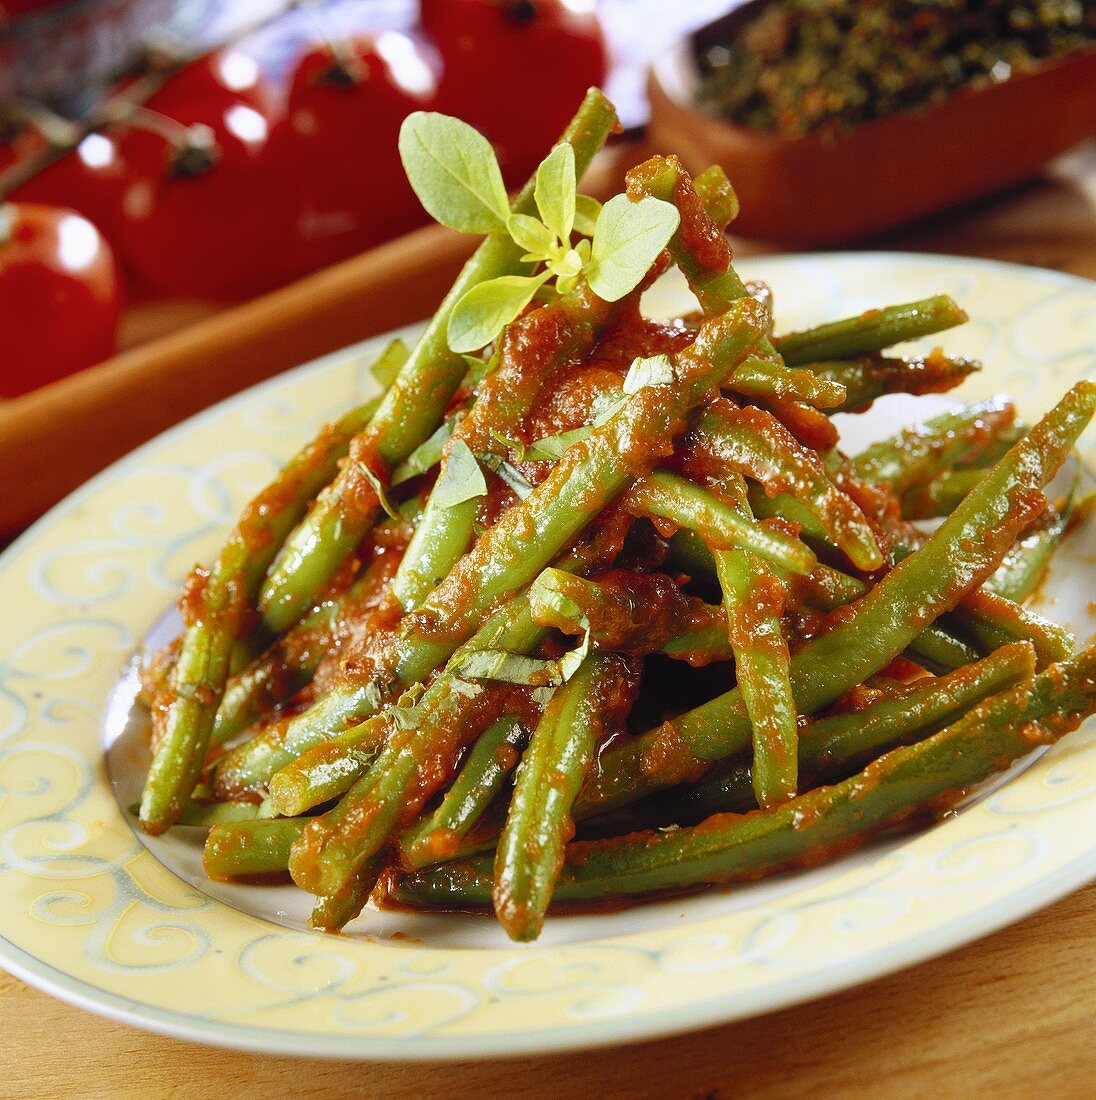 Green beans with tomato sauce